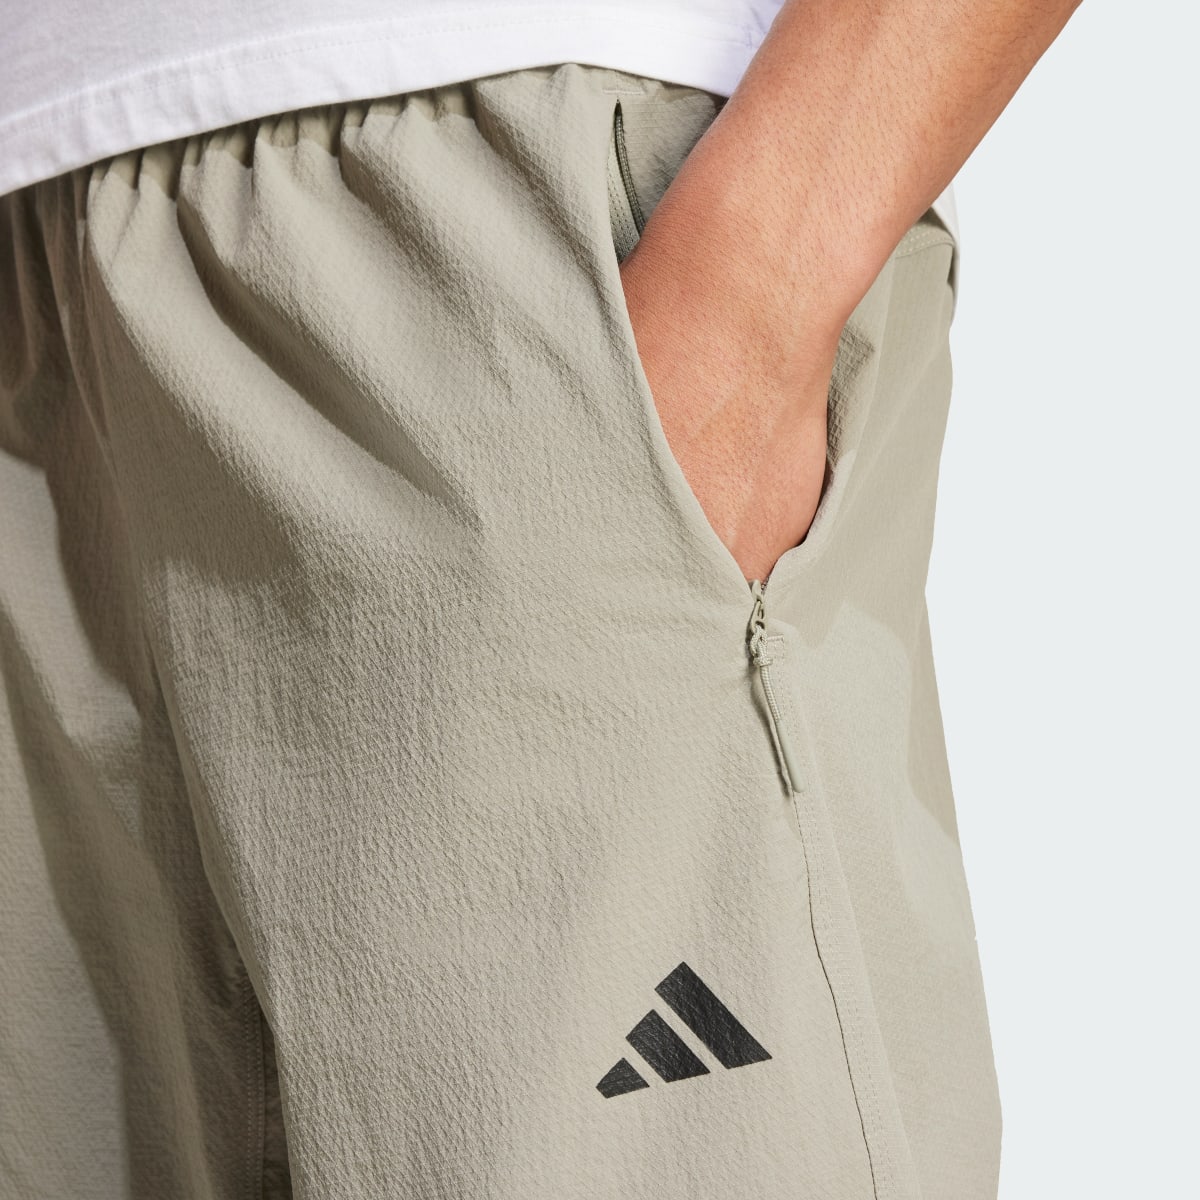 Adidas Designed for Training Workout Pants. 7